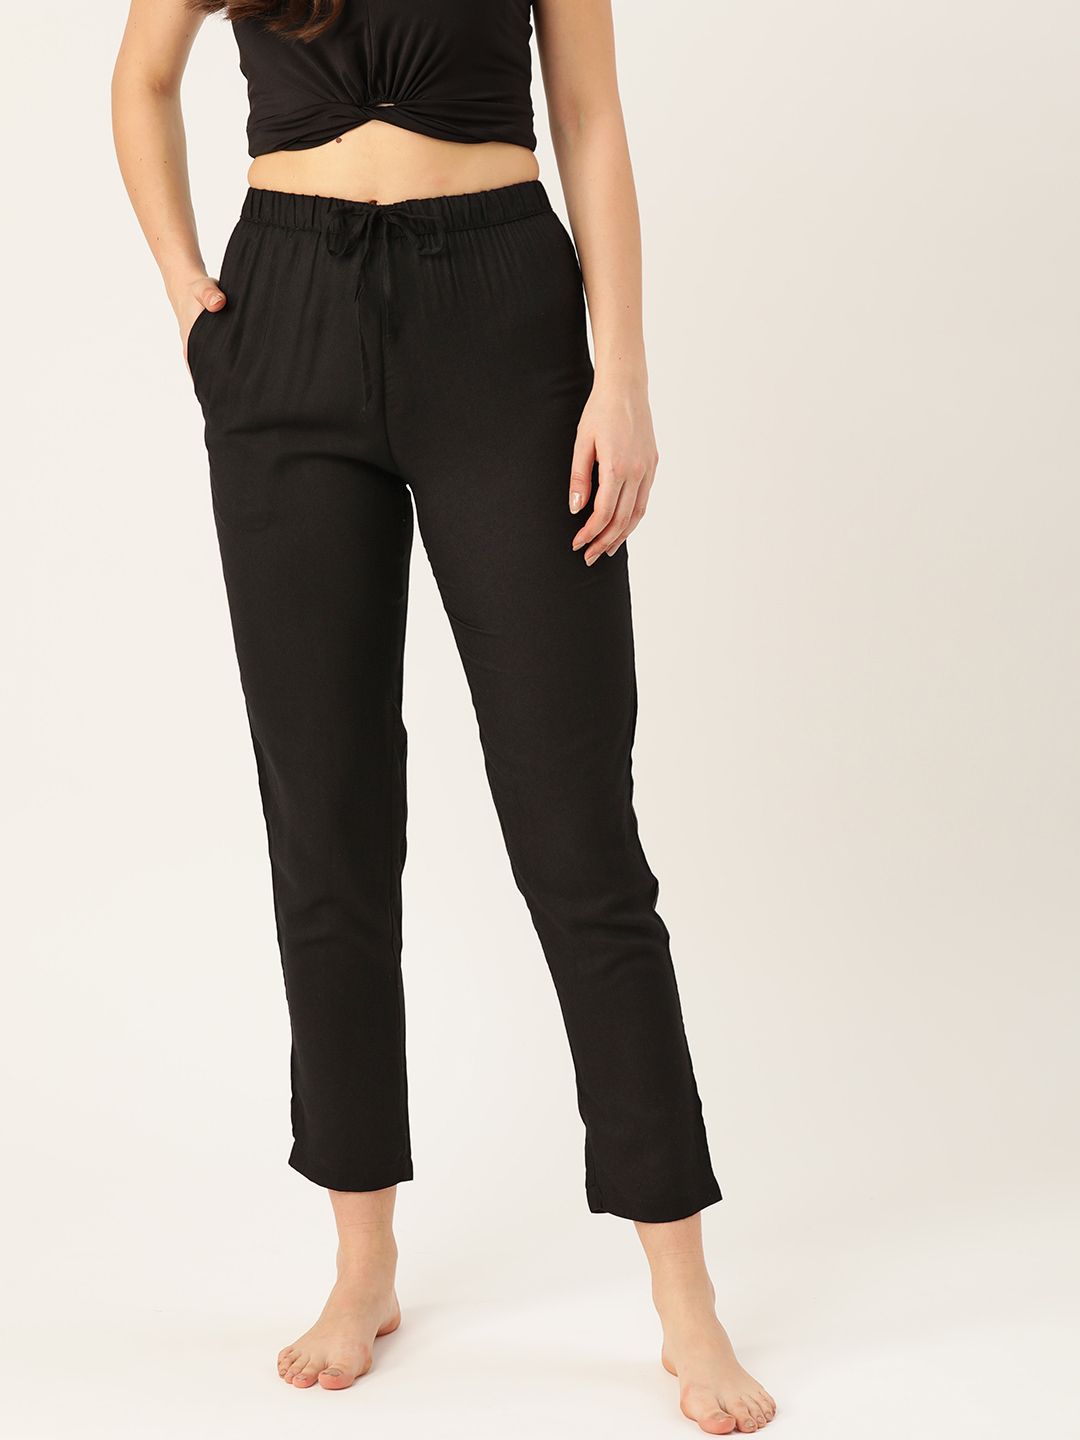 ETC Women Black Solid Lounge Pants Price in India